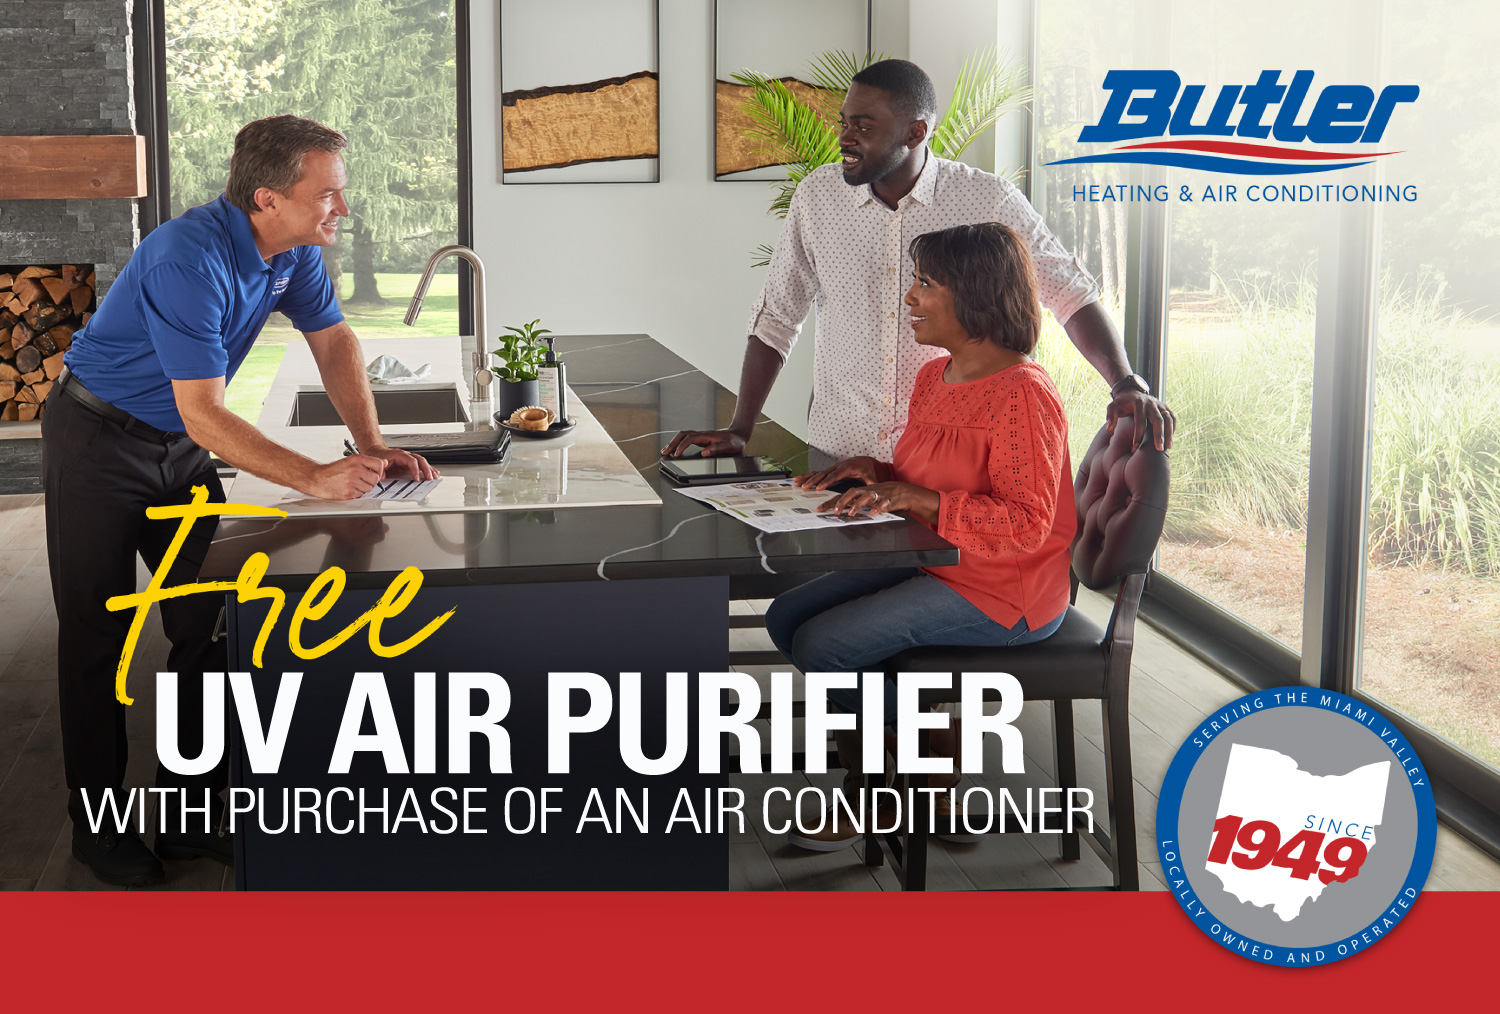 FREE UV Air Purifier - Butler Heating and Air Conditioning